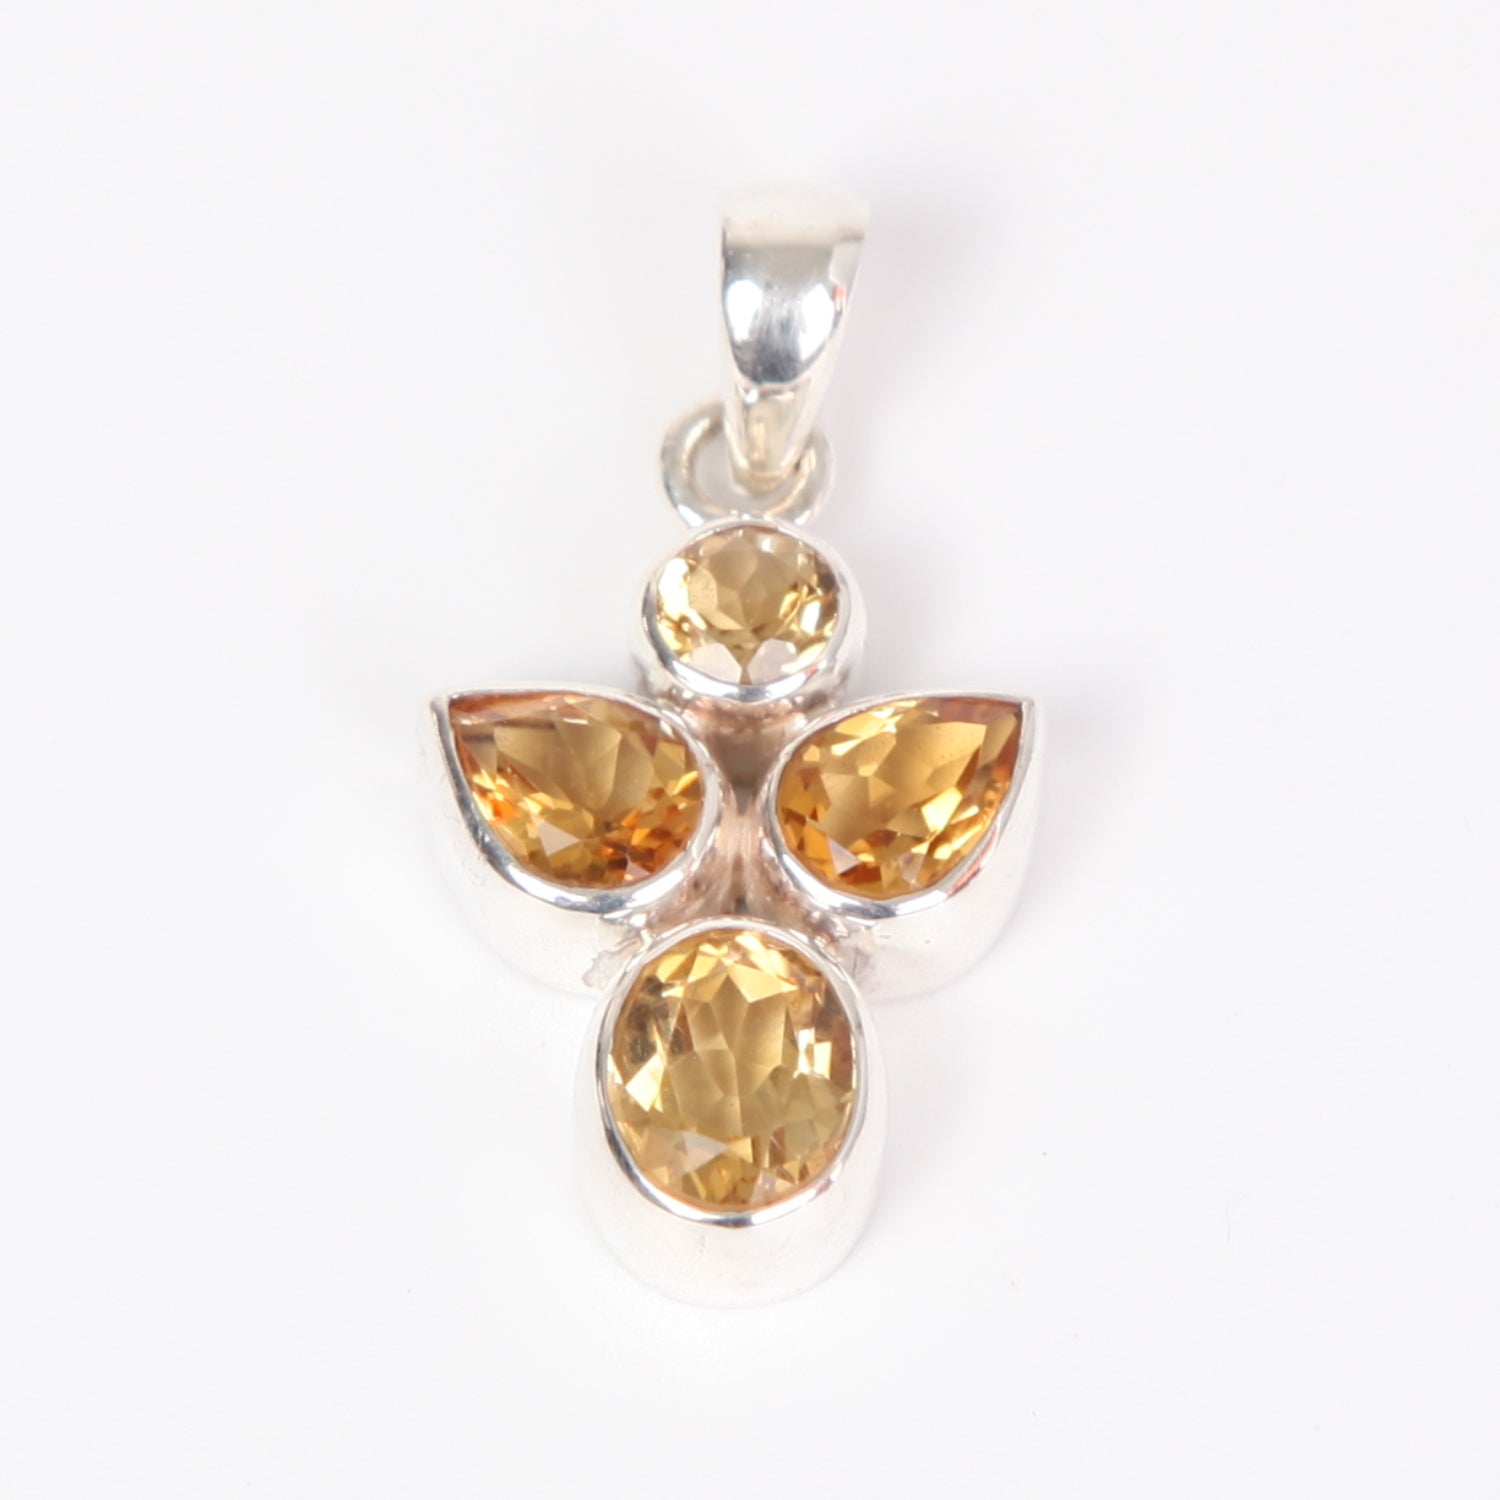 Citrine Pendant with Sterling Silver